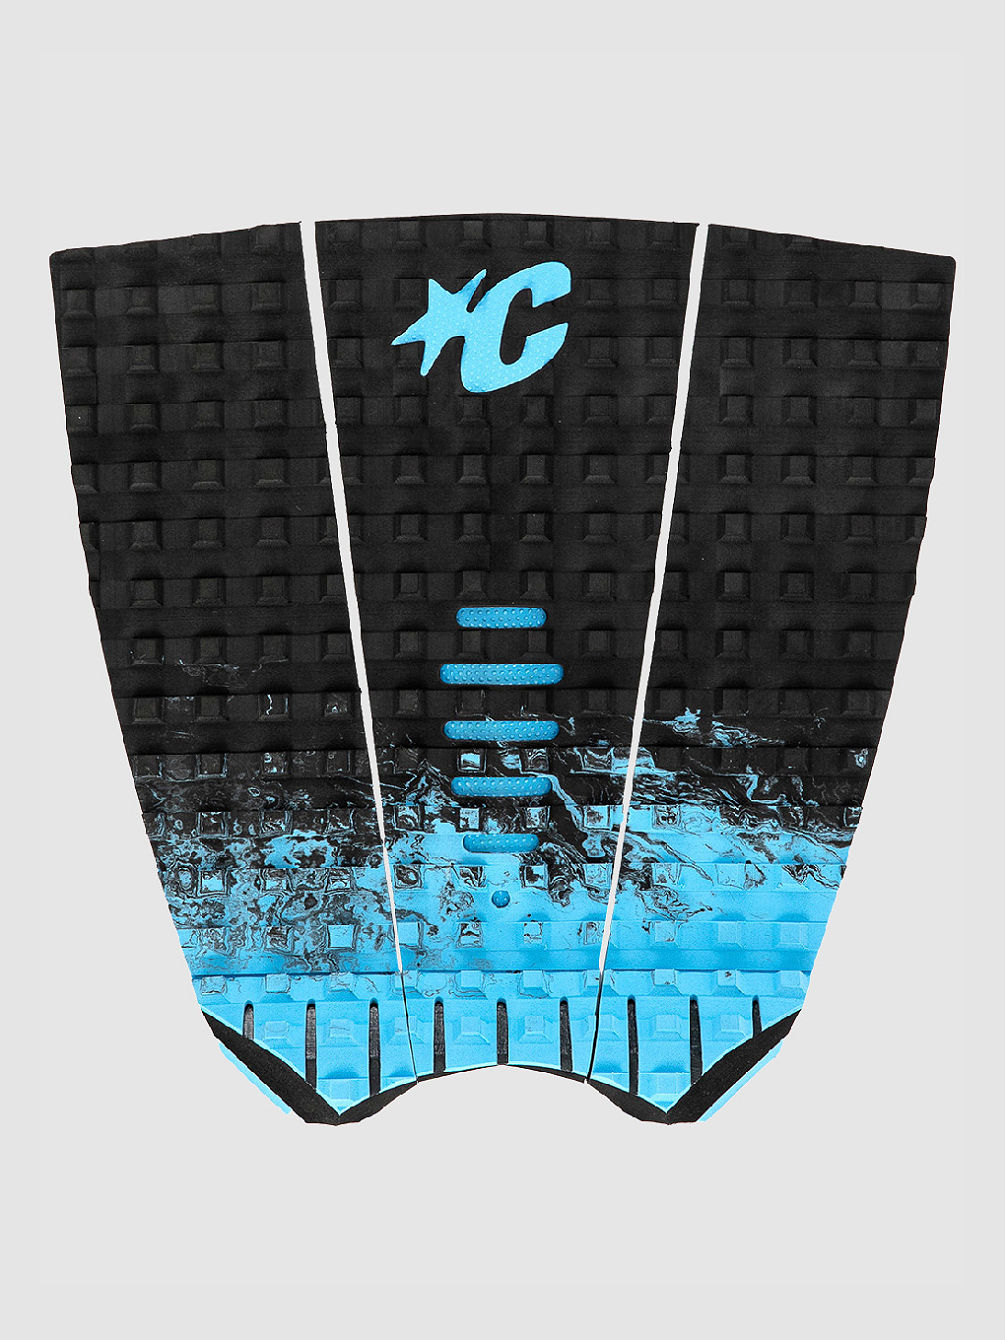 Mick Fanning Traction Tail Deck